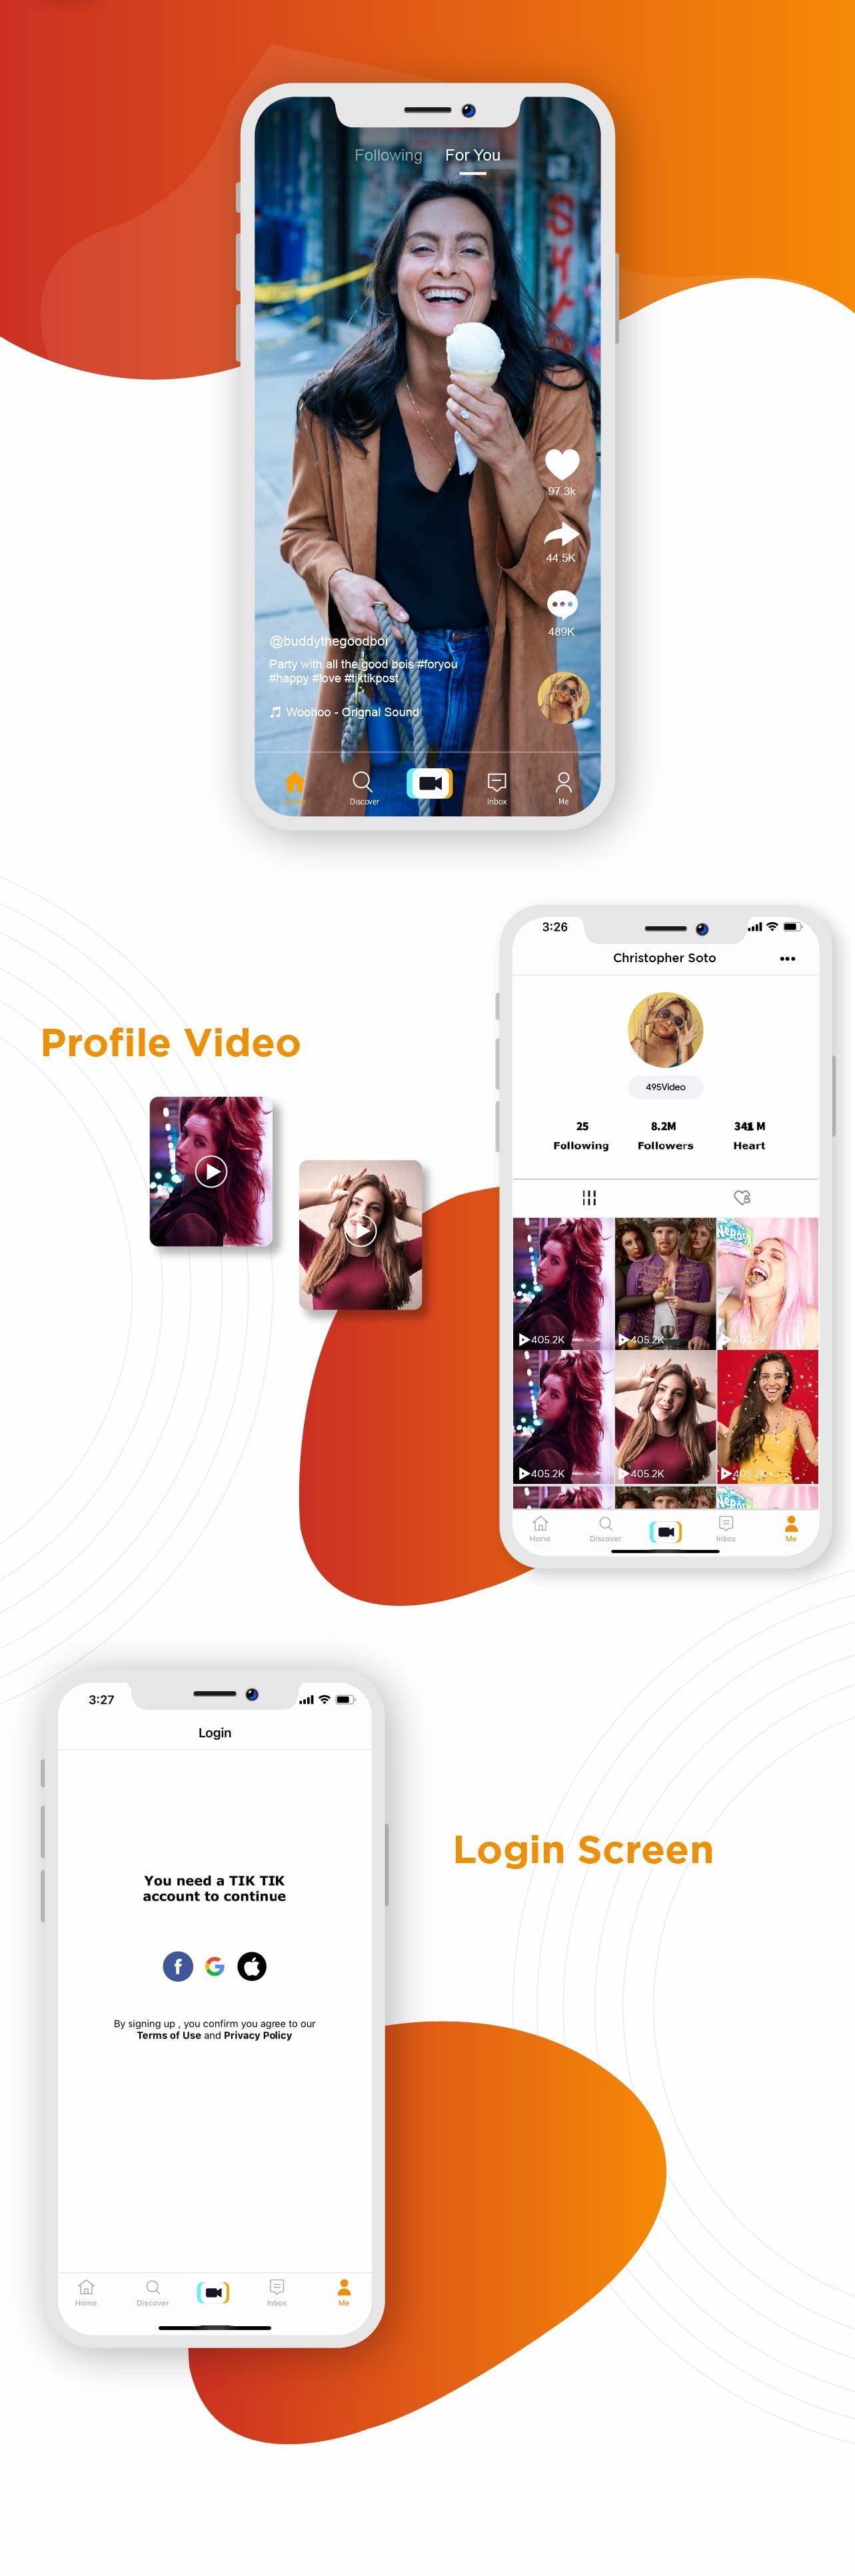 TicTic - IOS media app for creating and sharing short videos - 4